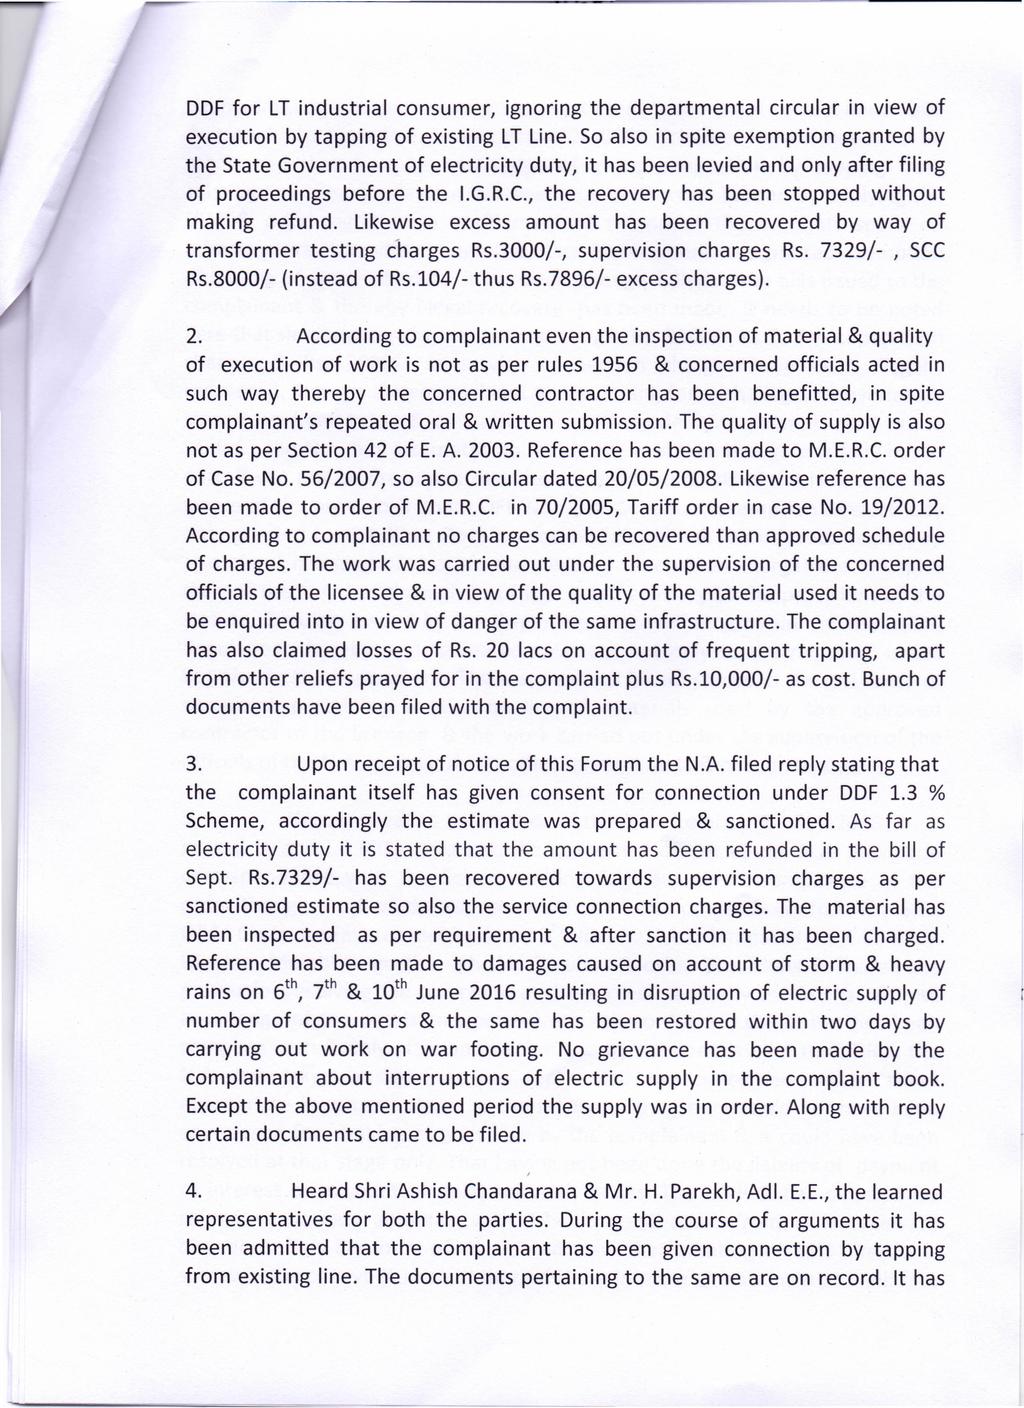 DDF for LT industrial consumer, ignoring the departmental circular in view of execution by tapping of existing LT Line.